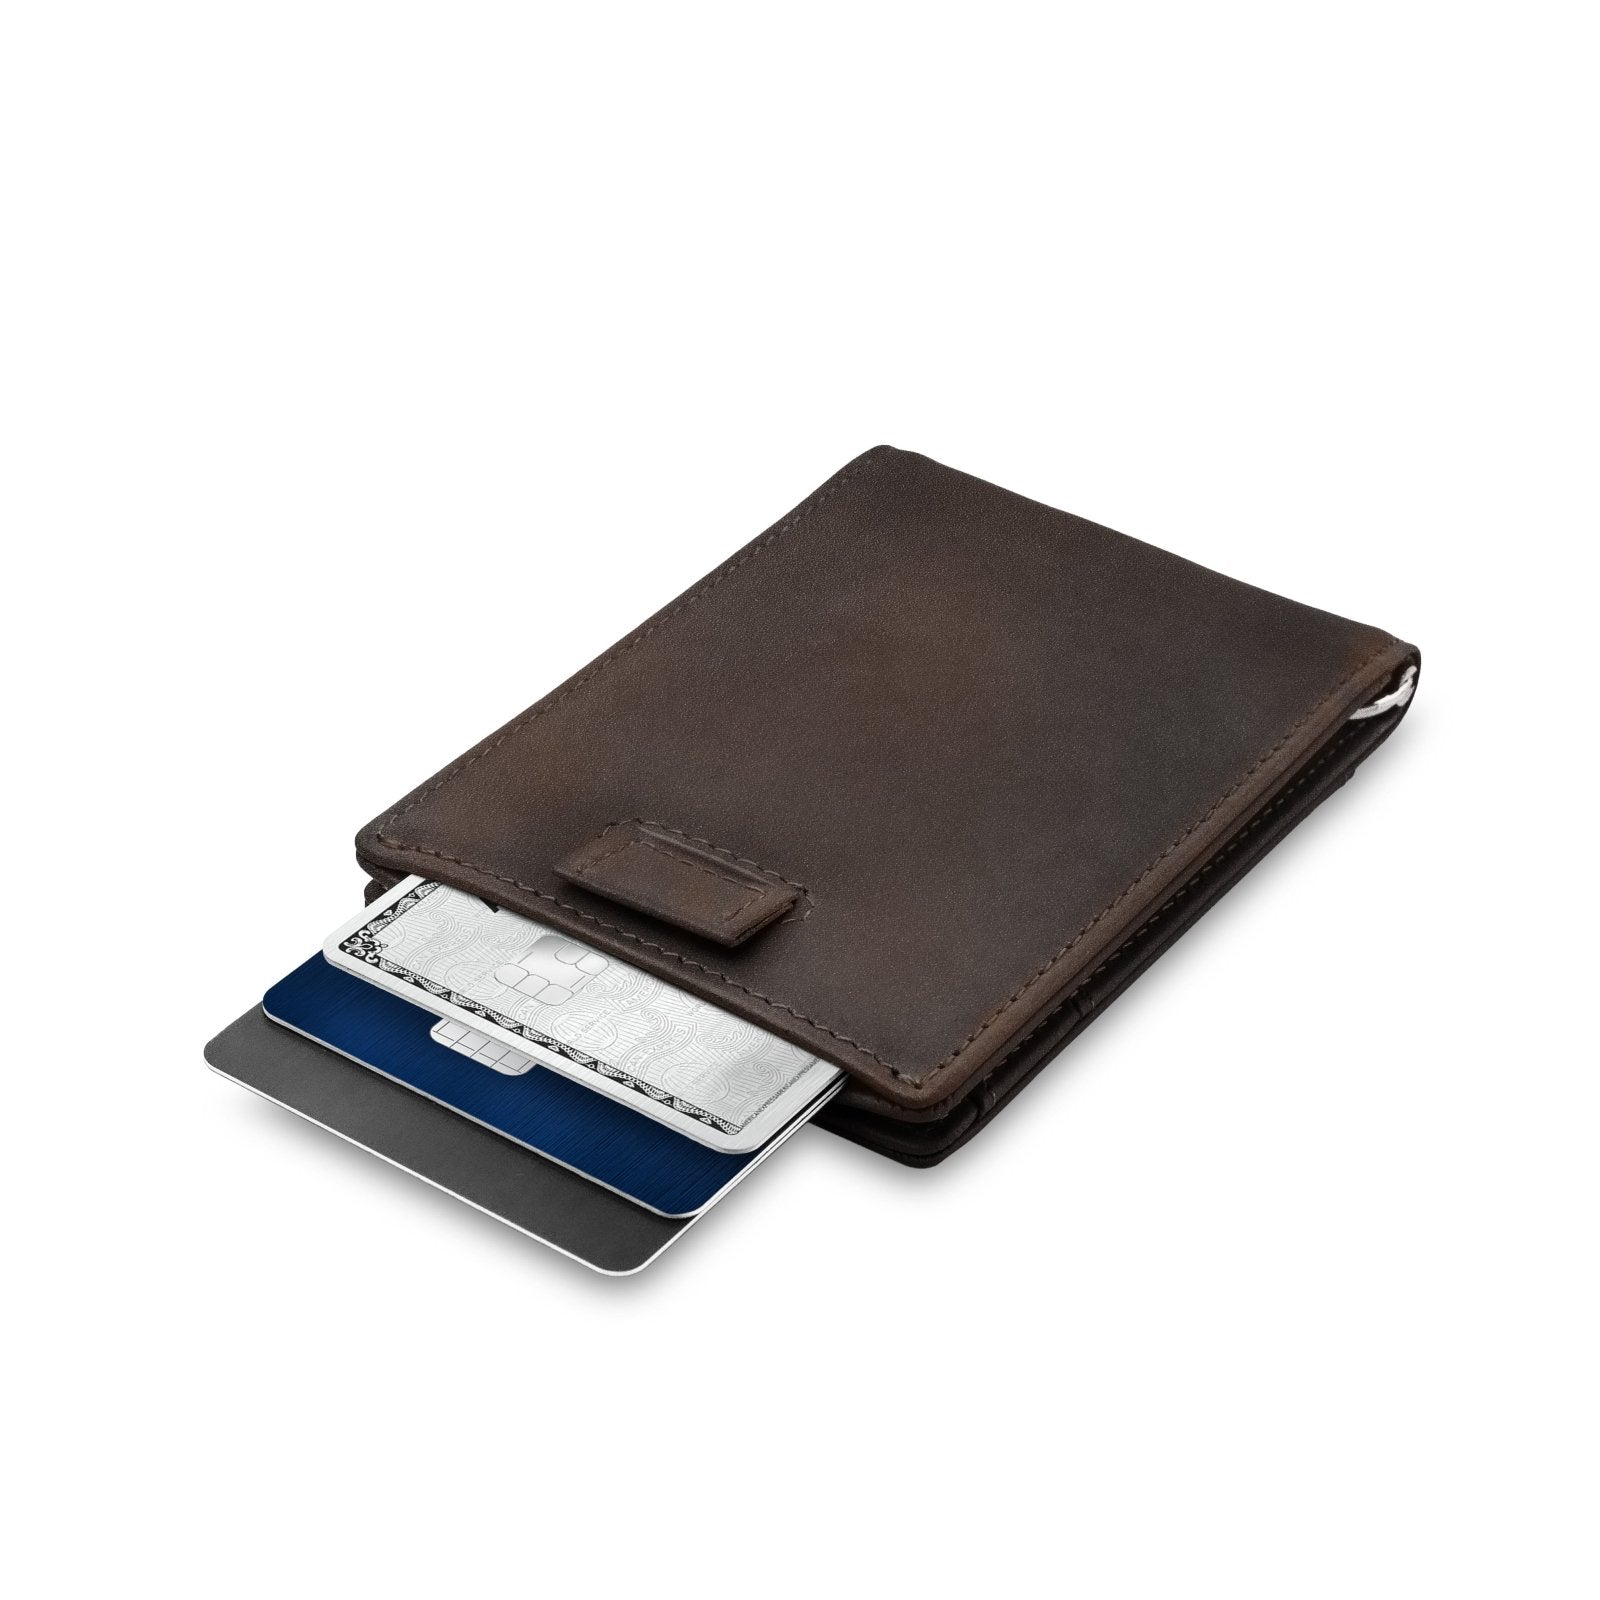 Slim Leather Wallet for Men with Money Clip and RFID Blocking